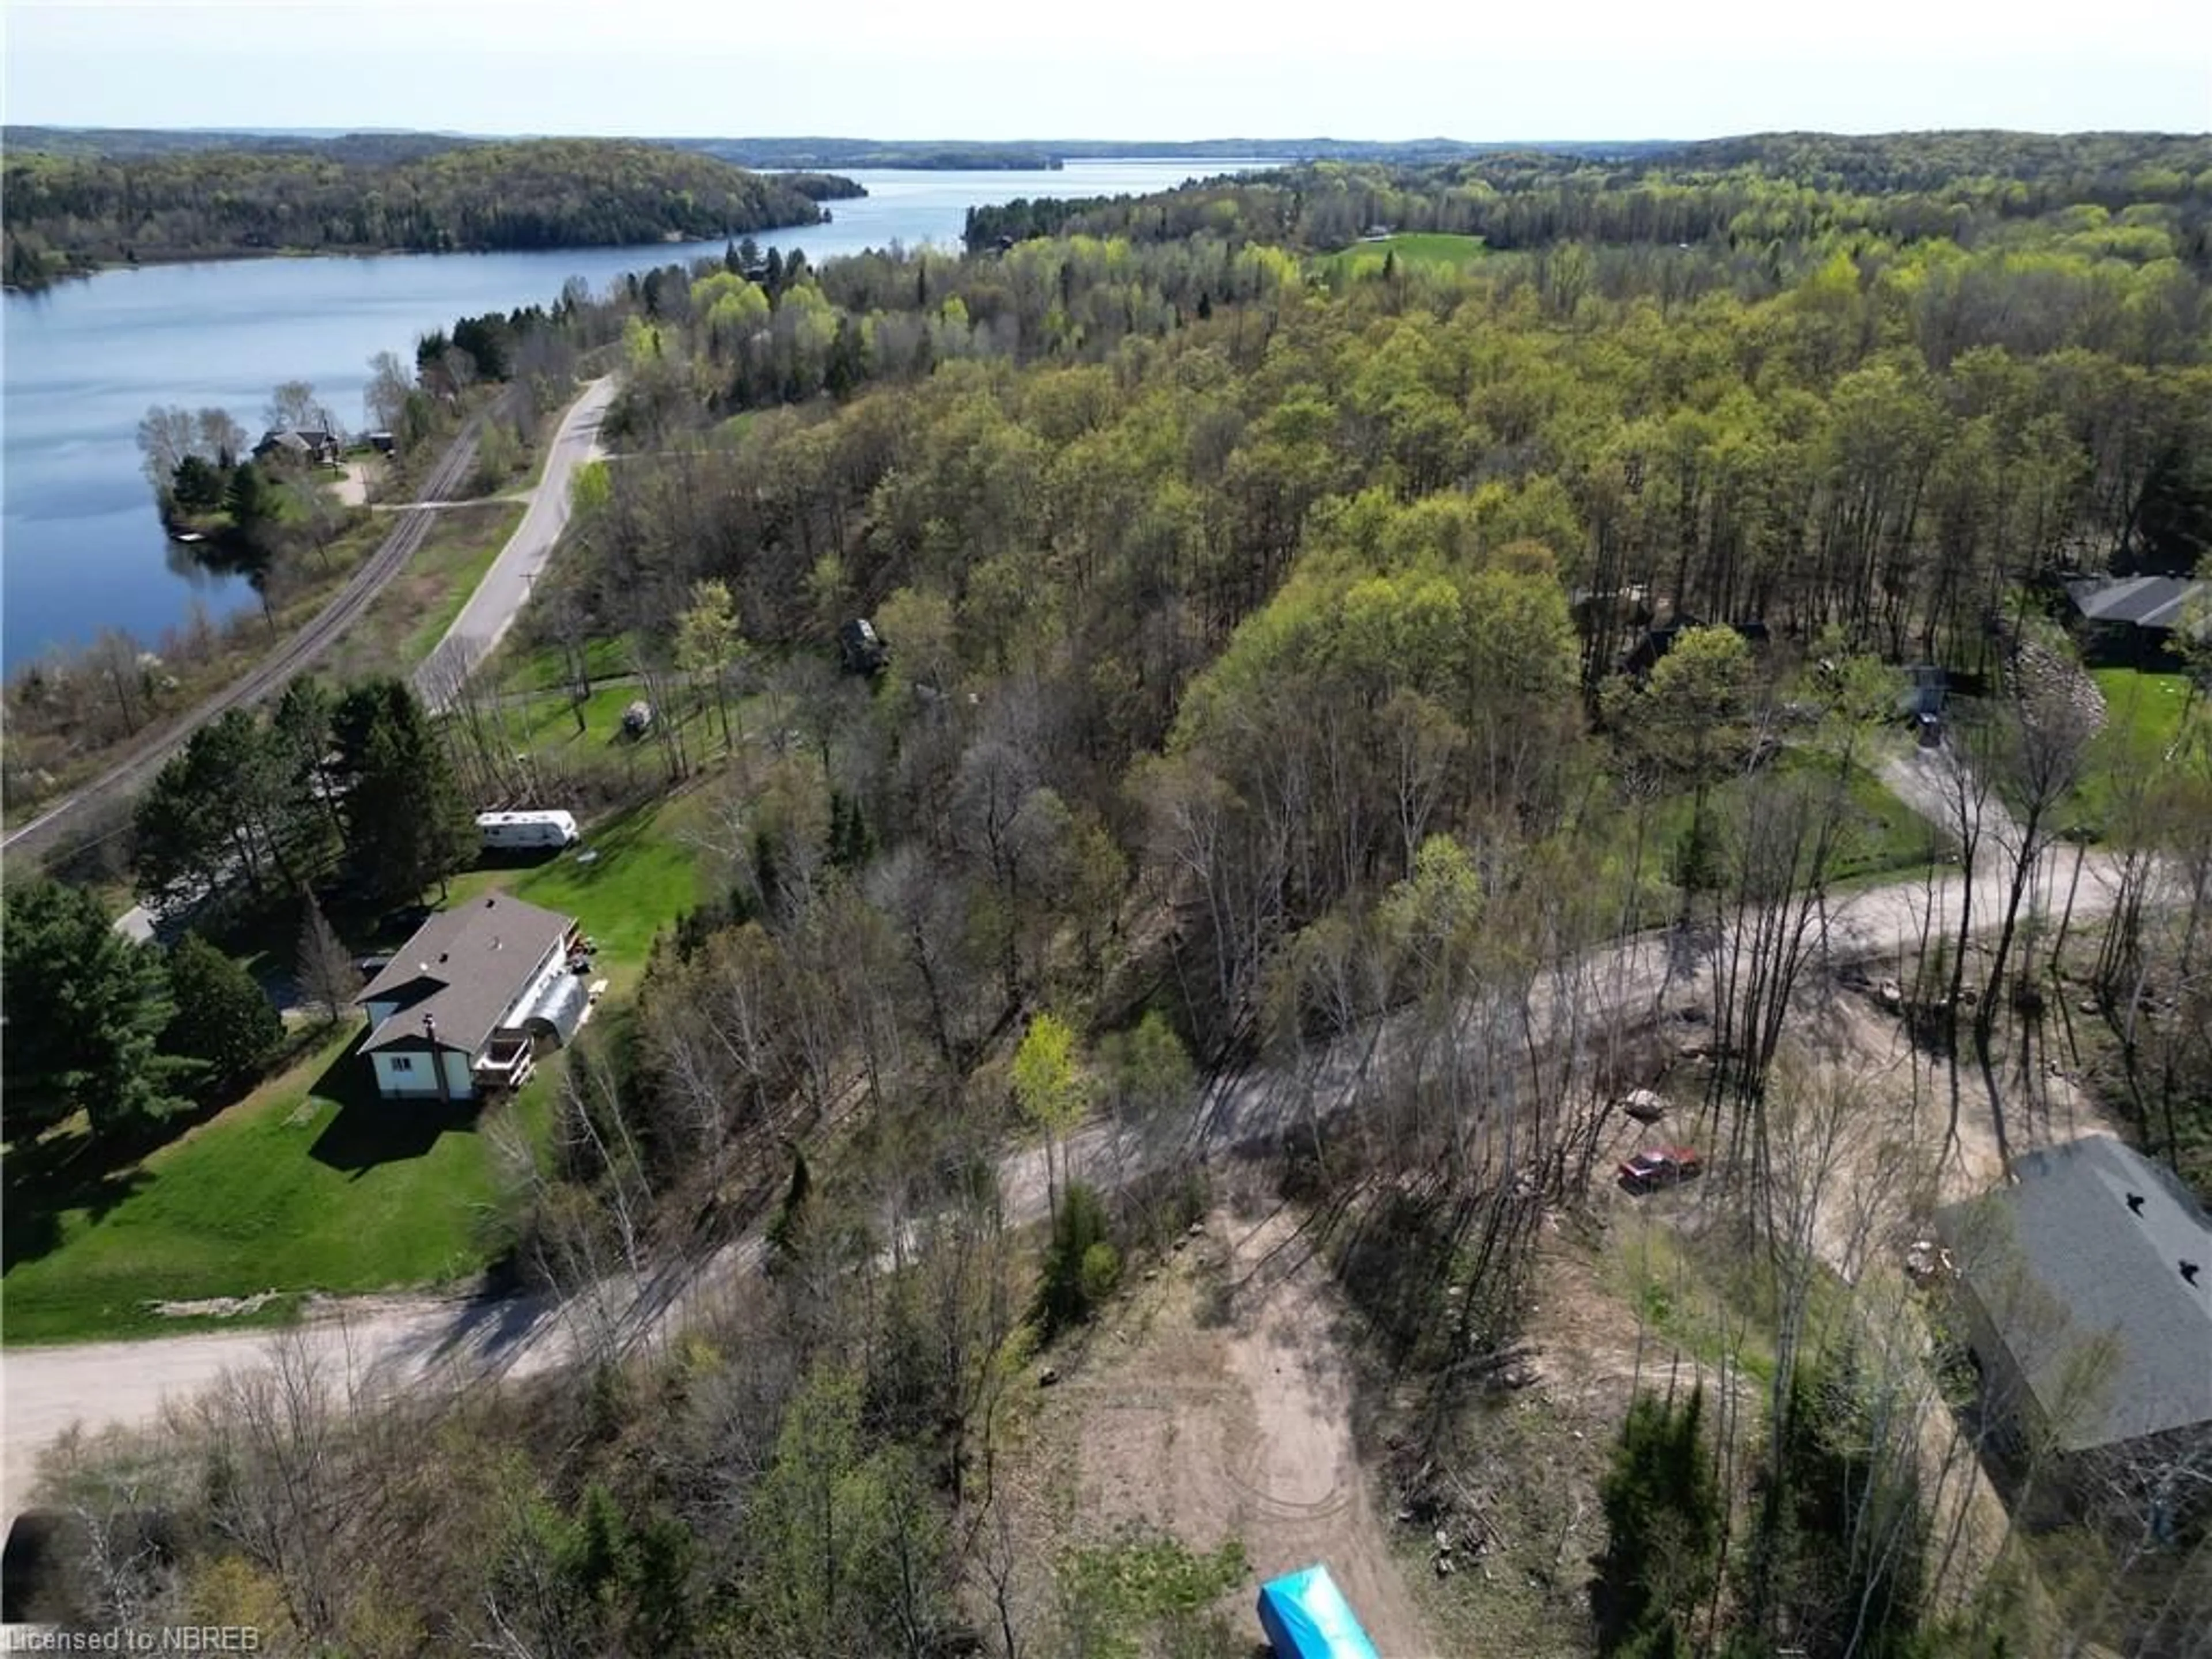 Lakeview for 101 Greenwood Dr, Bonfield Ontario P0H 1E0